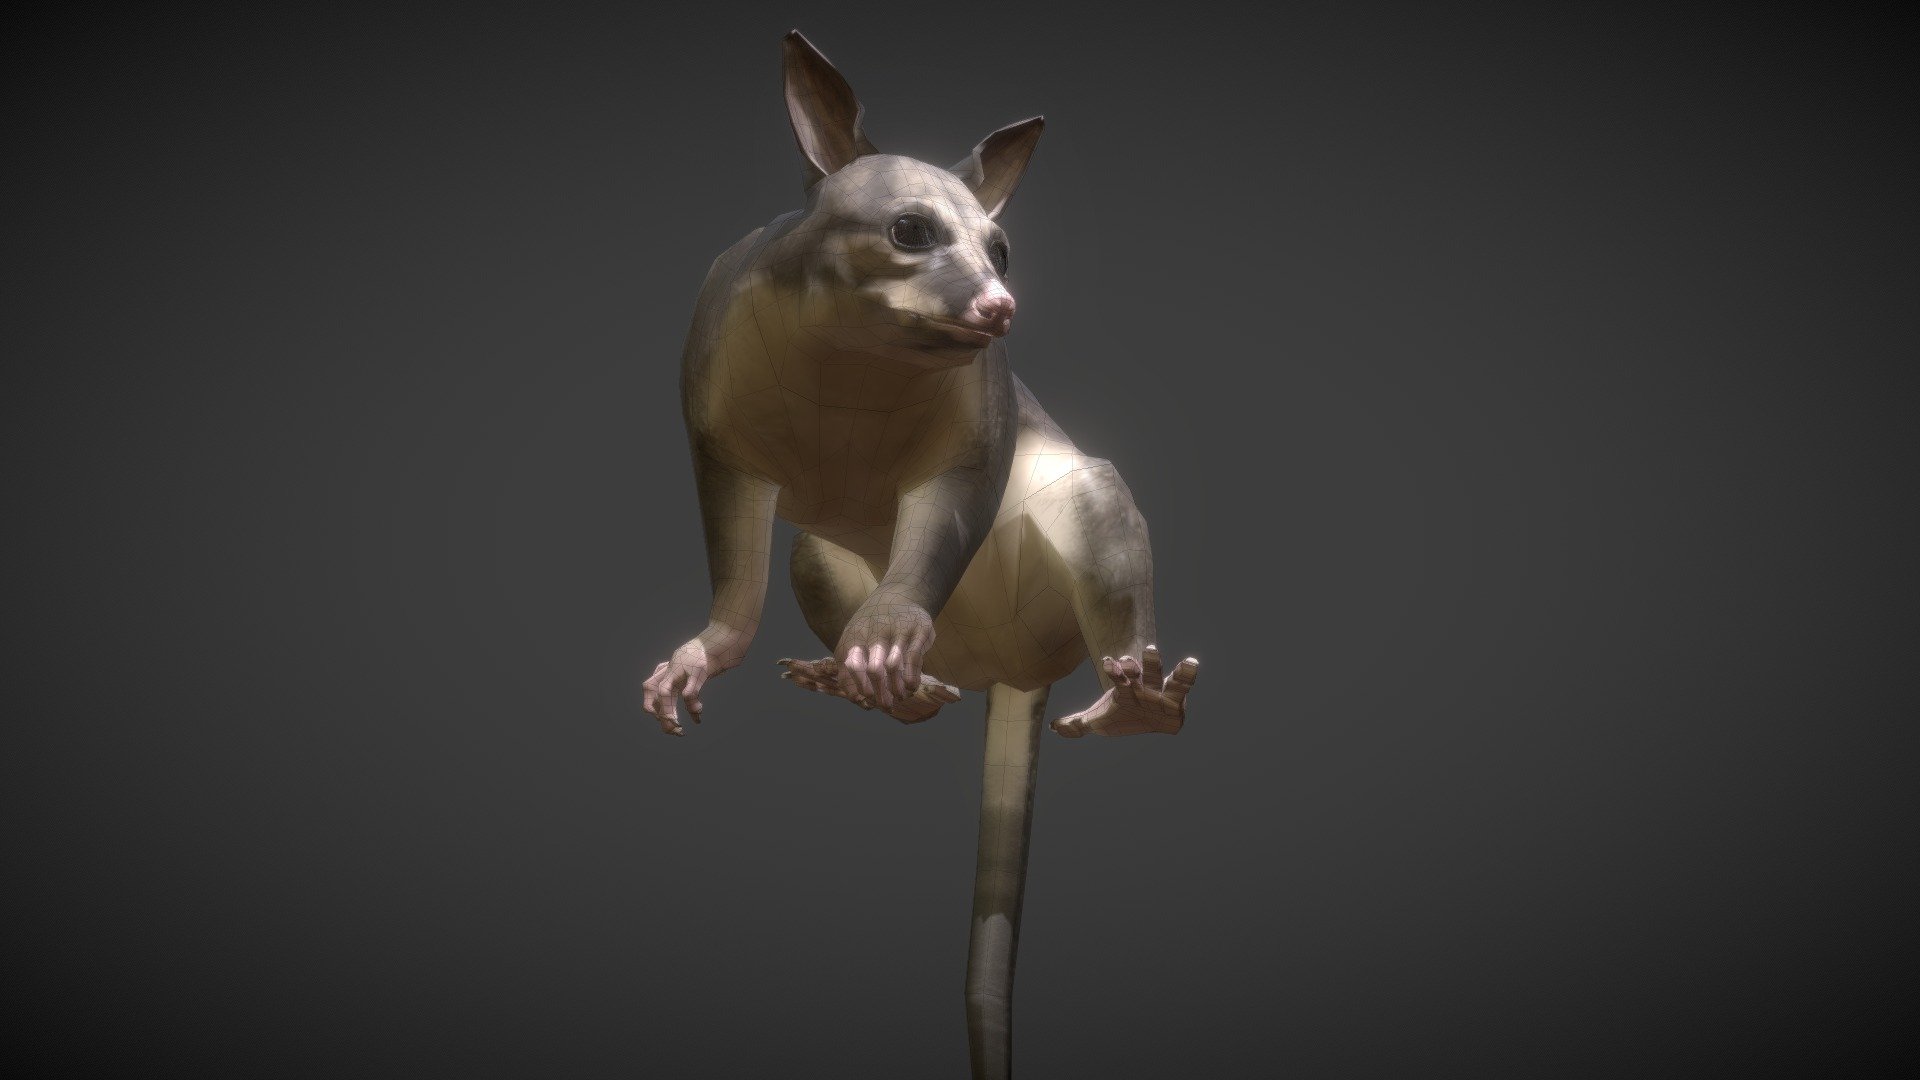 Possum mesh with baked animation in FBX format.
Possum used for this project https://vimeo.com/454182425 - Australian Brushtail Possum - Buy Royalty Free 3D model by gamoo 3d model